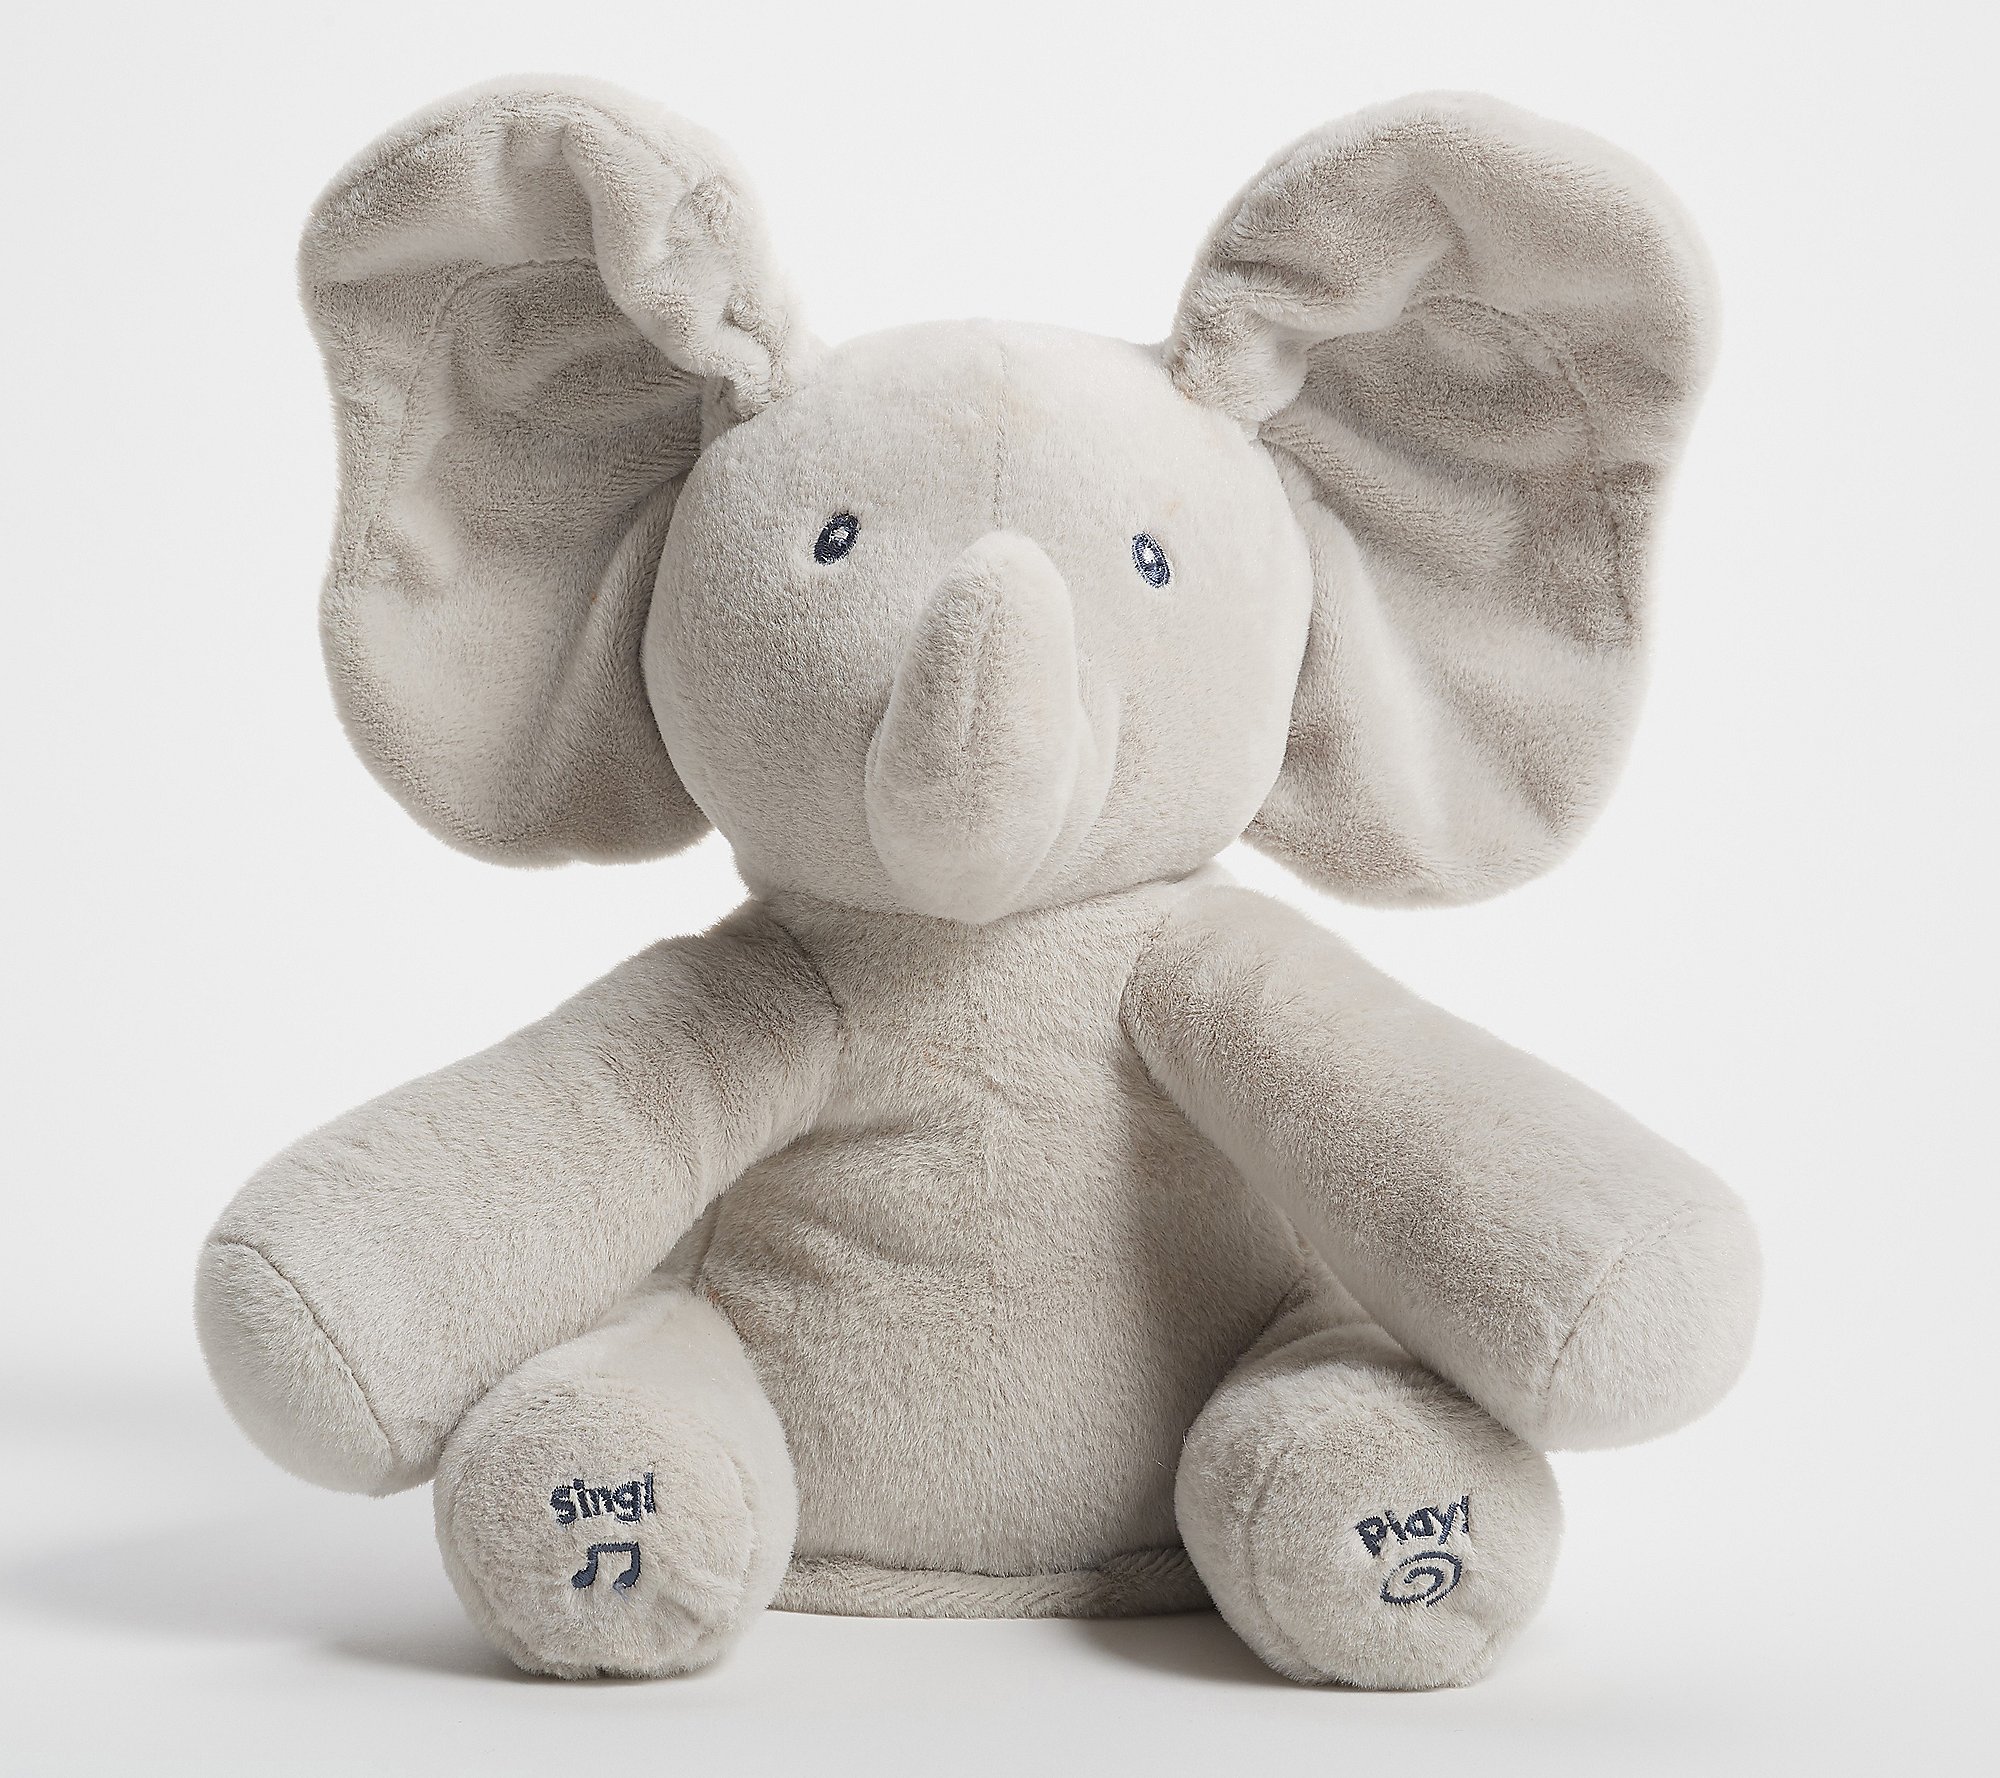 This Plushie Toy Makes a Perfect Party Gift or Bedtime Friend for Boys & Girls Fancy Friends Baby Elephant Stuffed Animal Cute & Funny Elephant Plush with a Monocle & Tophat for Children or Adults 